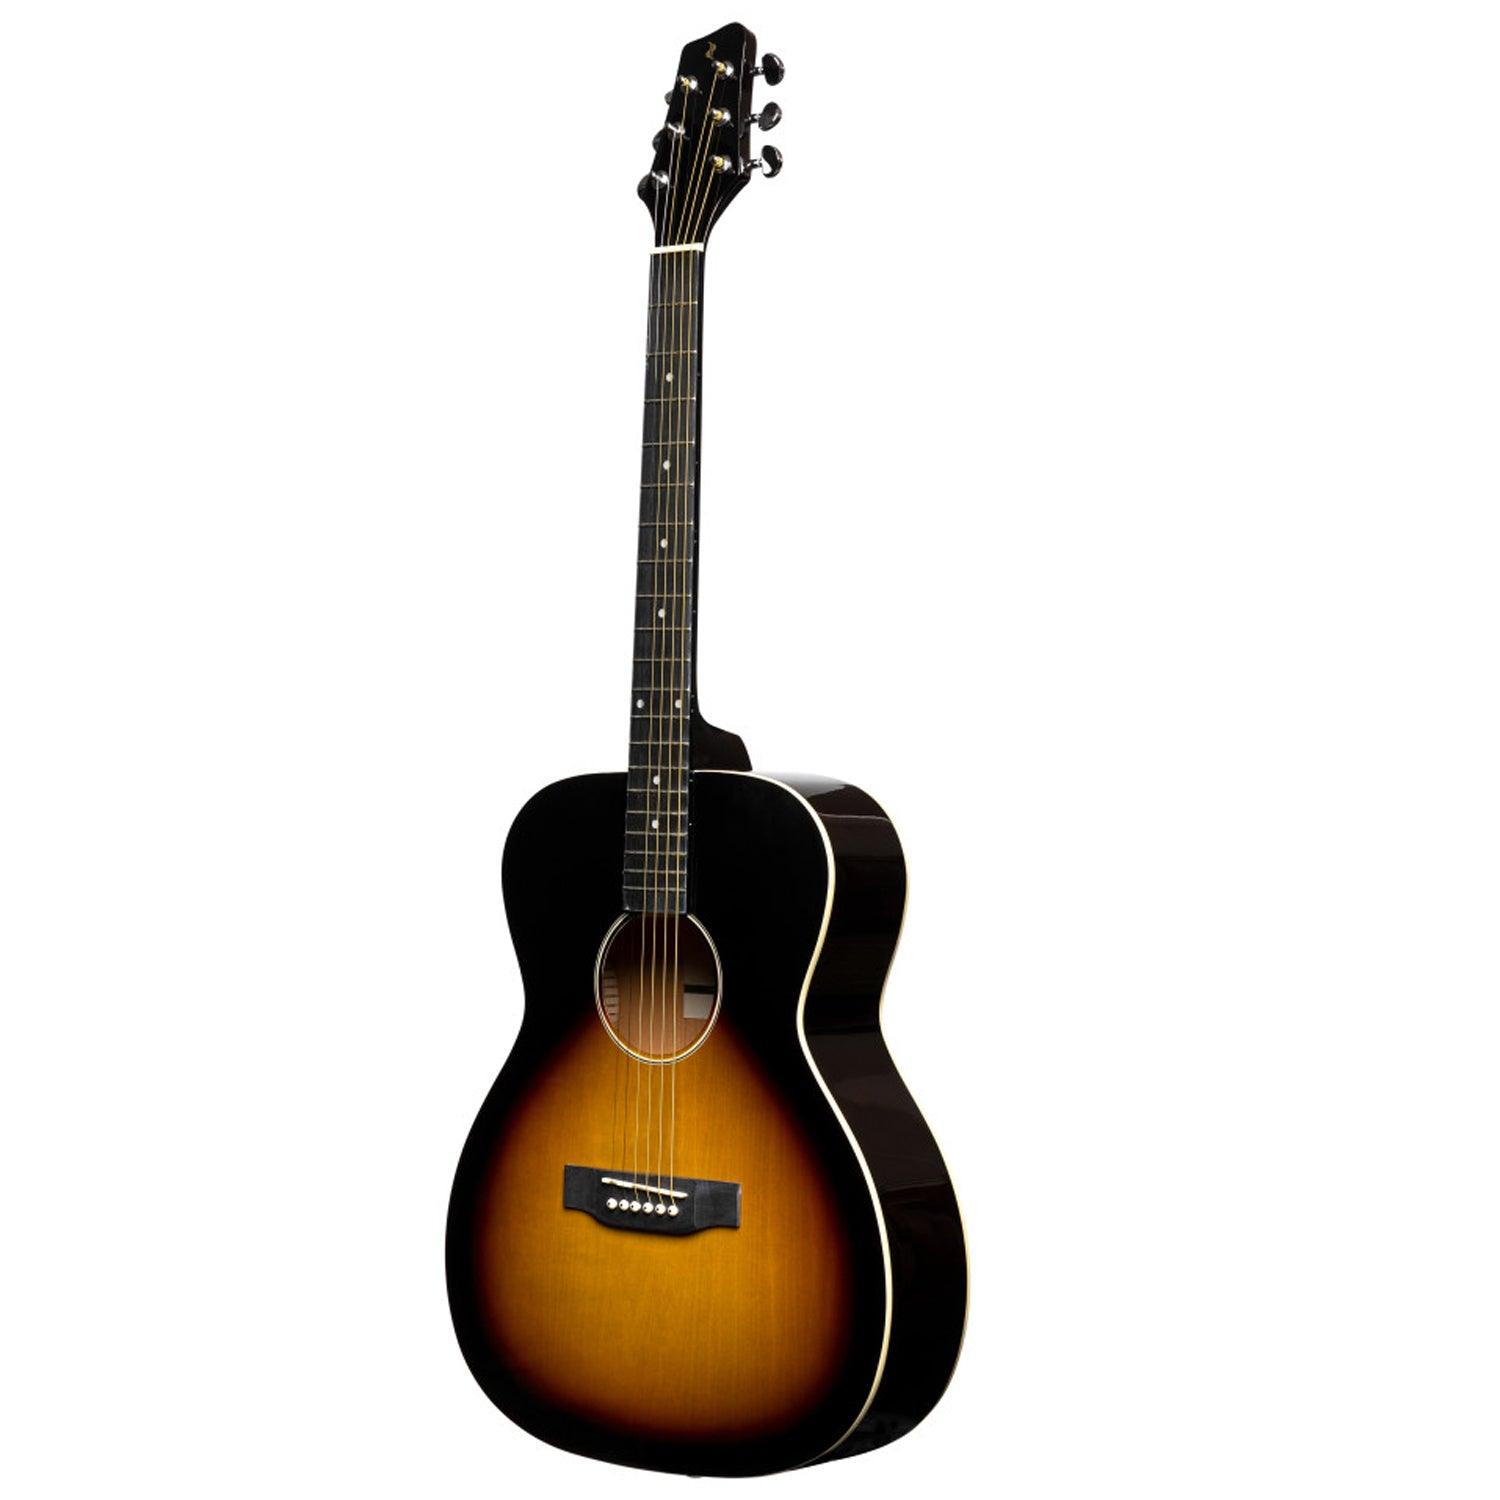 Stagg SA35 A-VS LH Sunburst Auditorium Guitar with Basswood Top Left Hand - DY Pro Audio